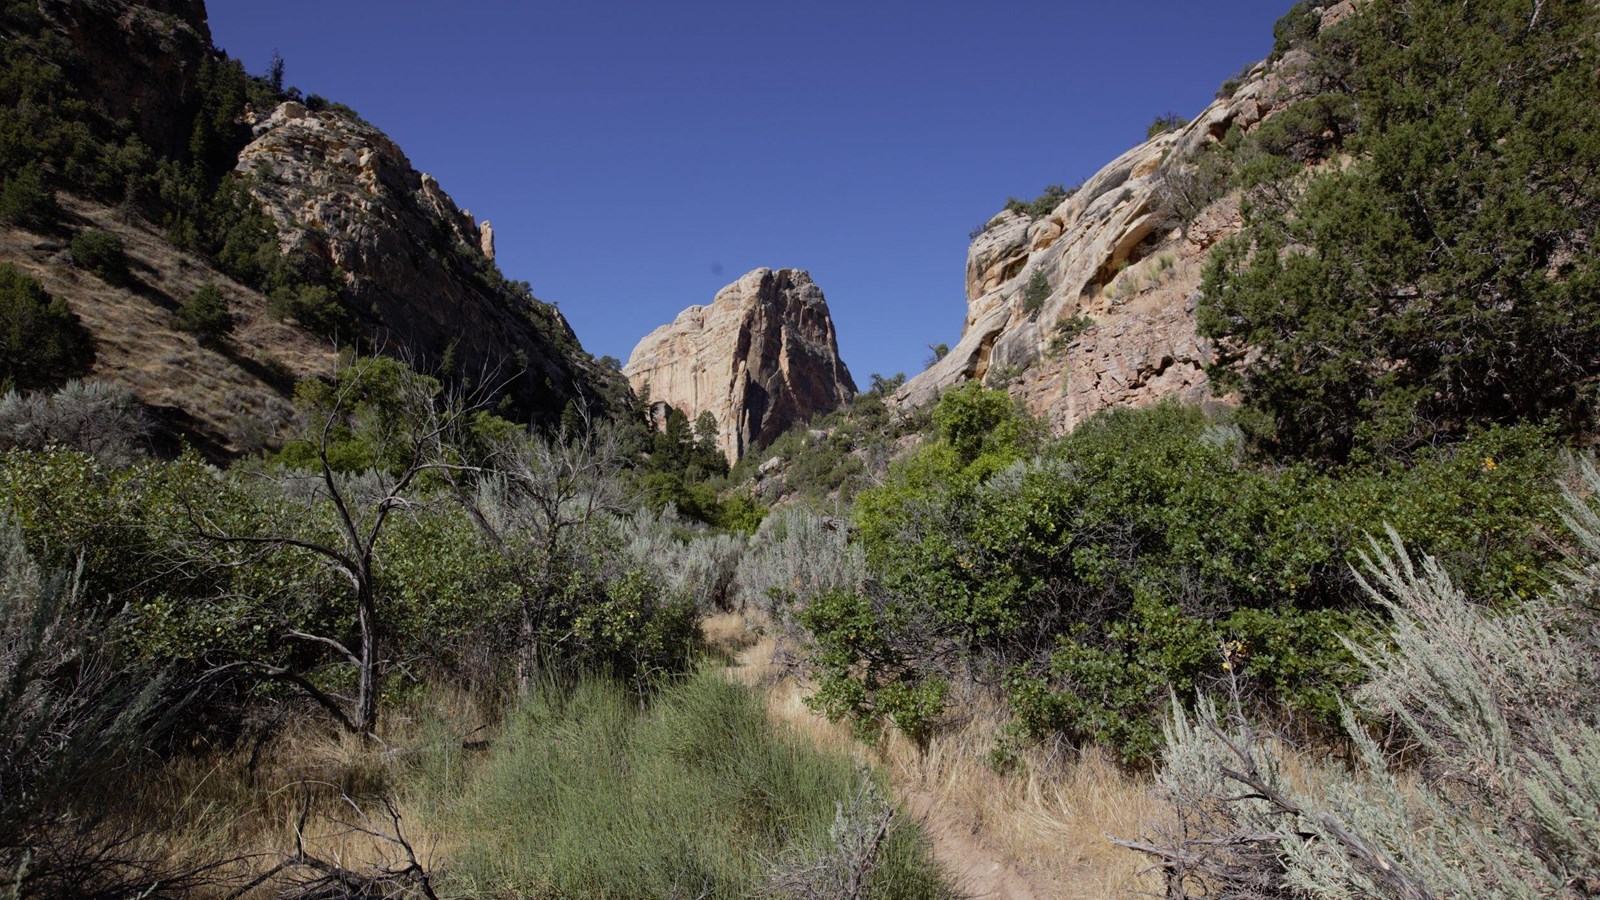 A small dirt trail winding through desert trees and shrubs towards a large sandstone bluff.